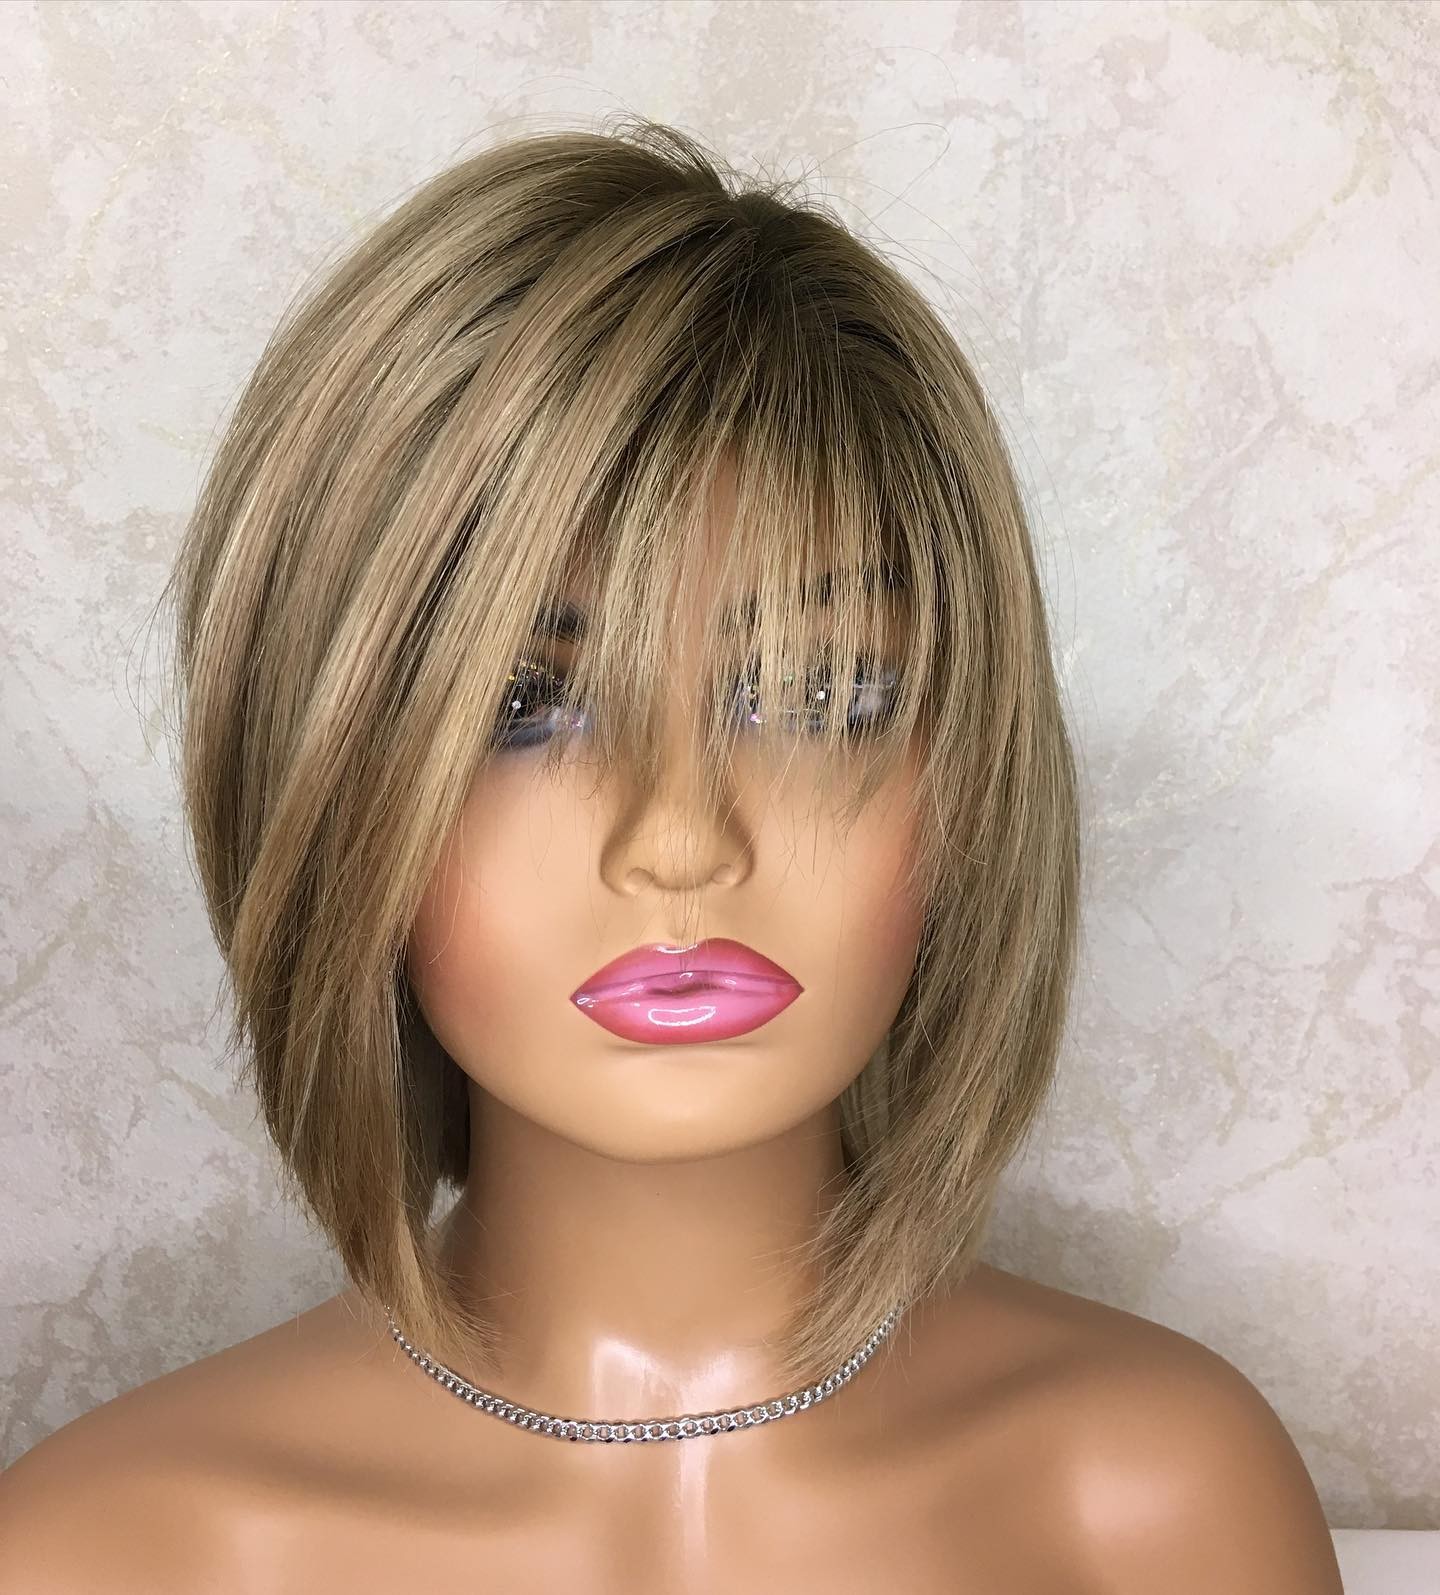 Why you should buy human hair wigs from Emma Hair Piece